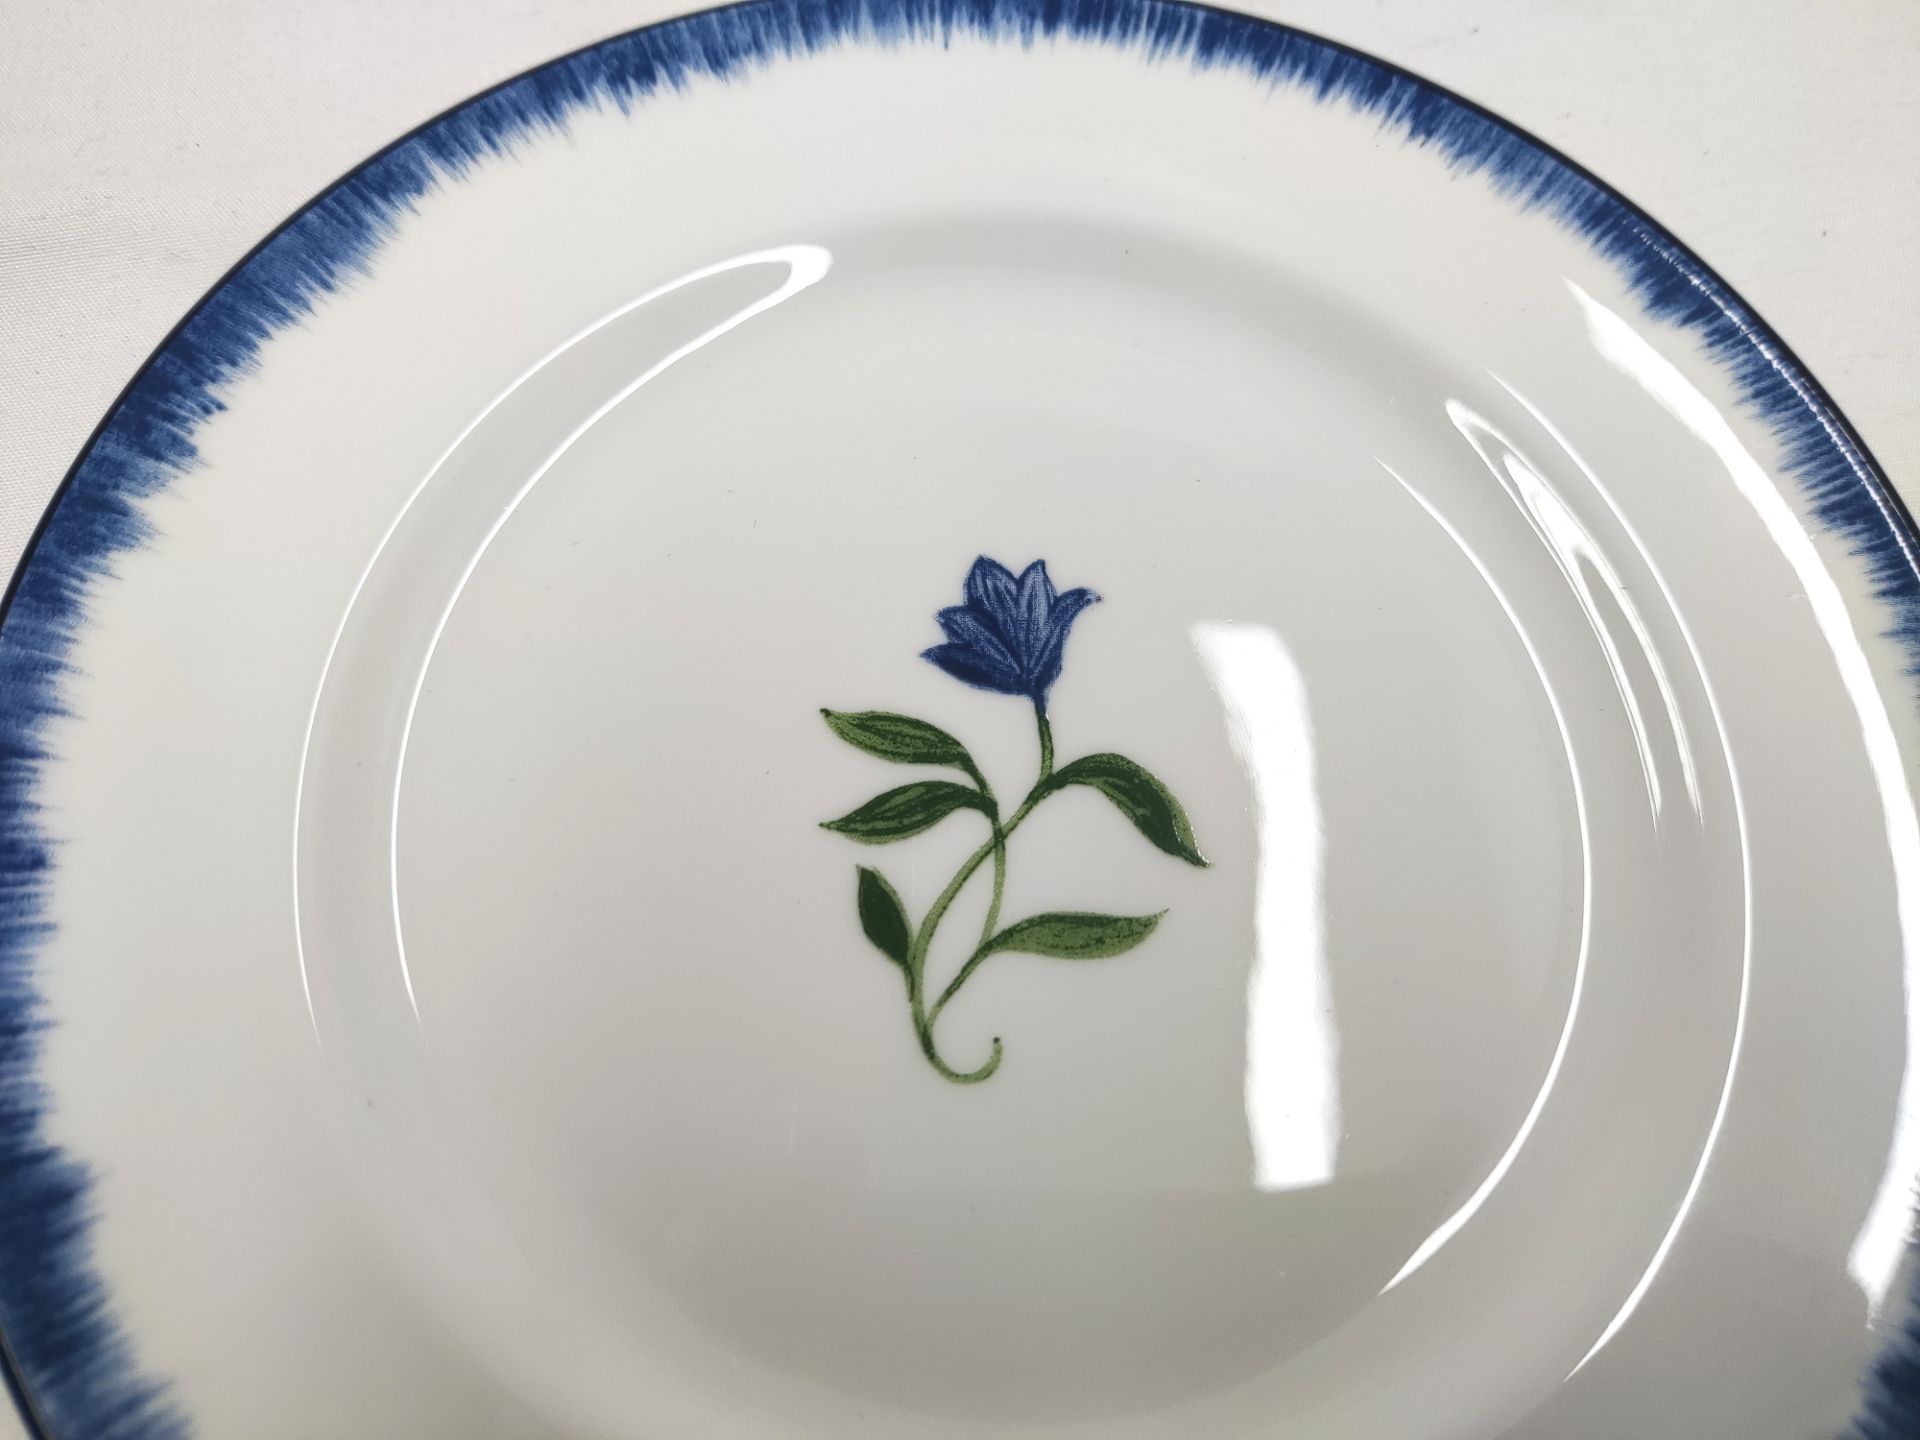 1 x HALCYON DAYS Nina Campbell Marguerite 6" Side Plate - New/Boxed - Original RRP £59.00 - Image 9 of 10